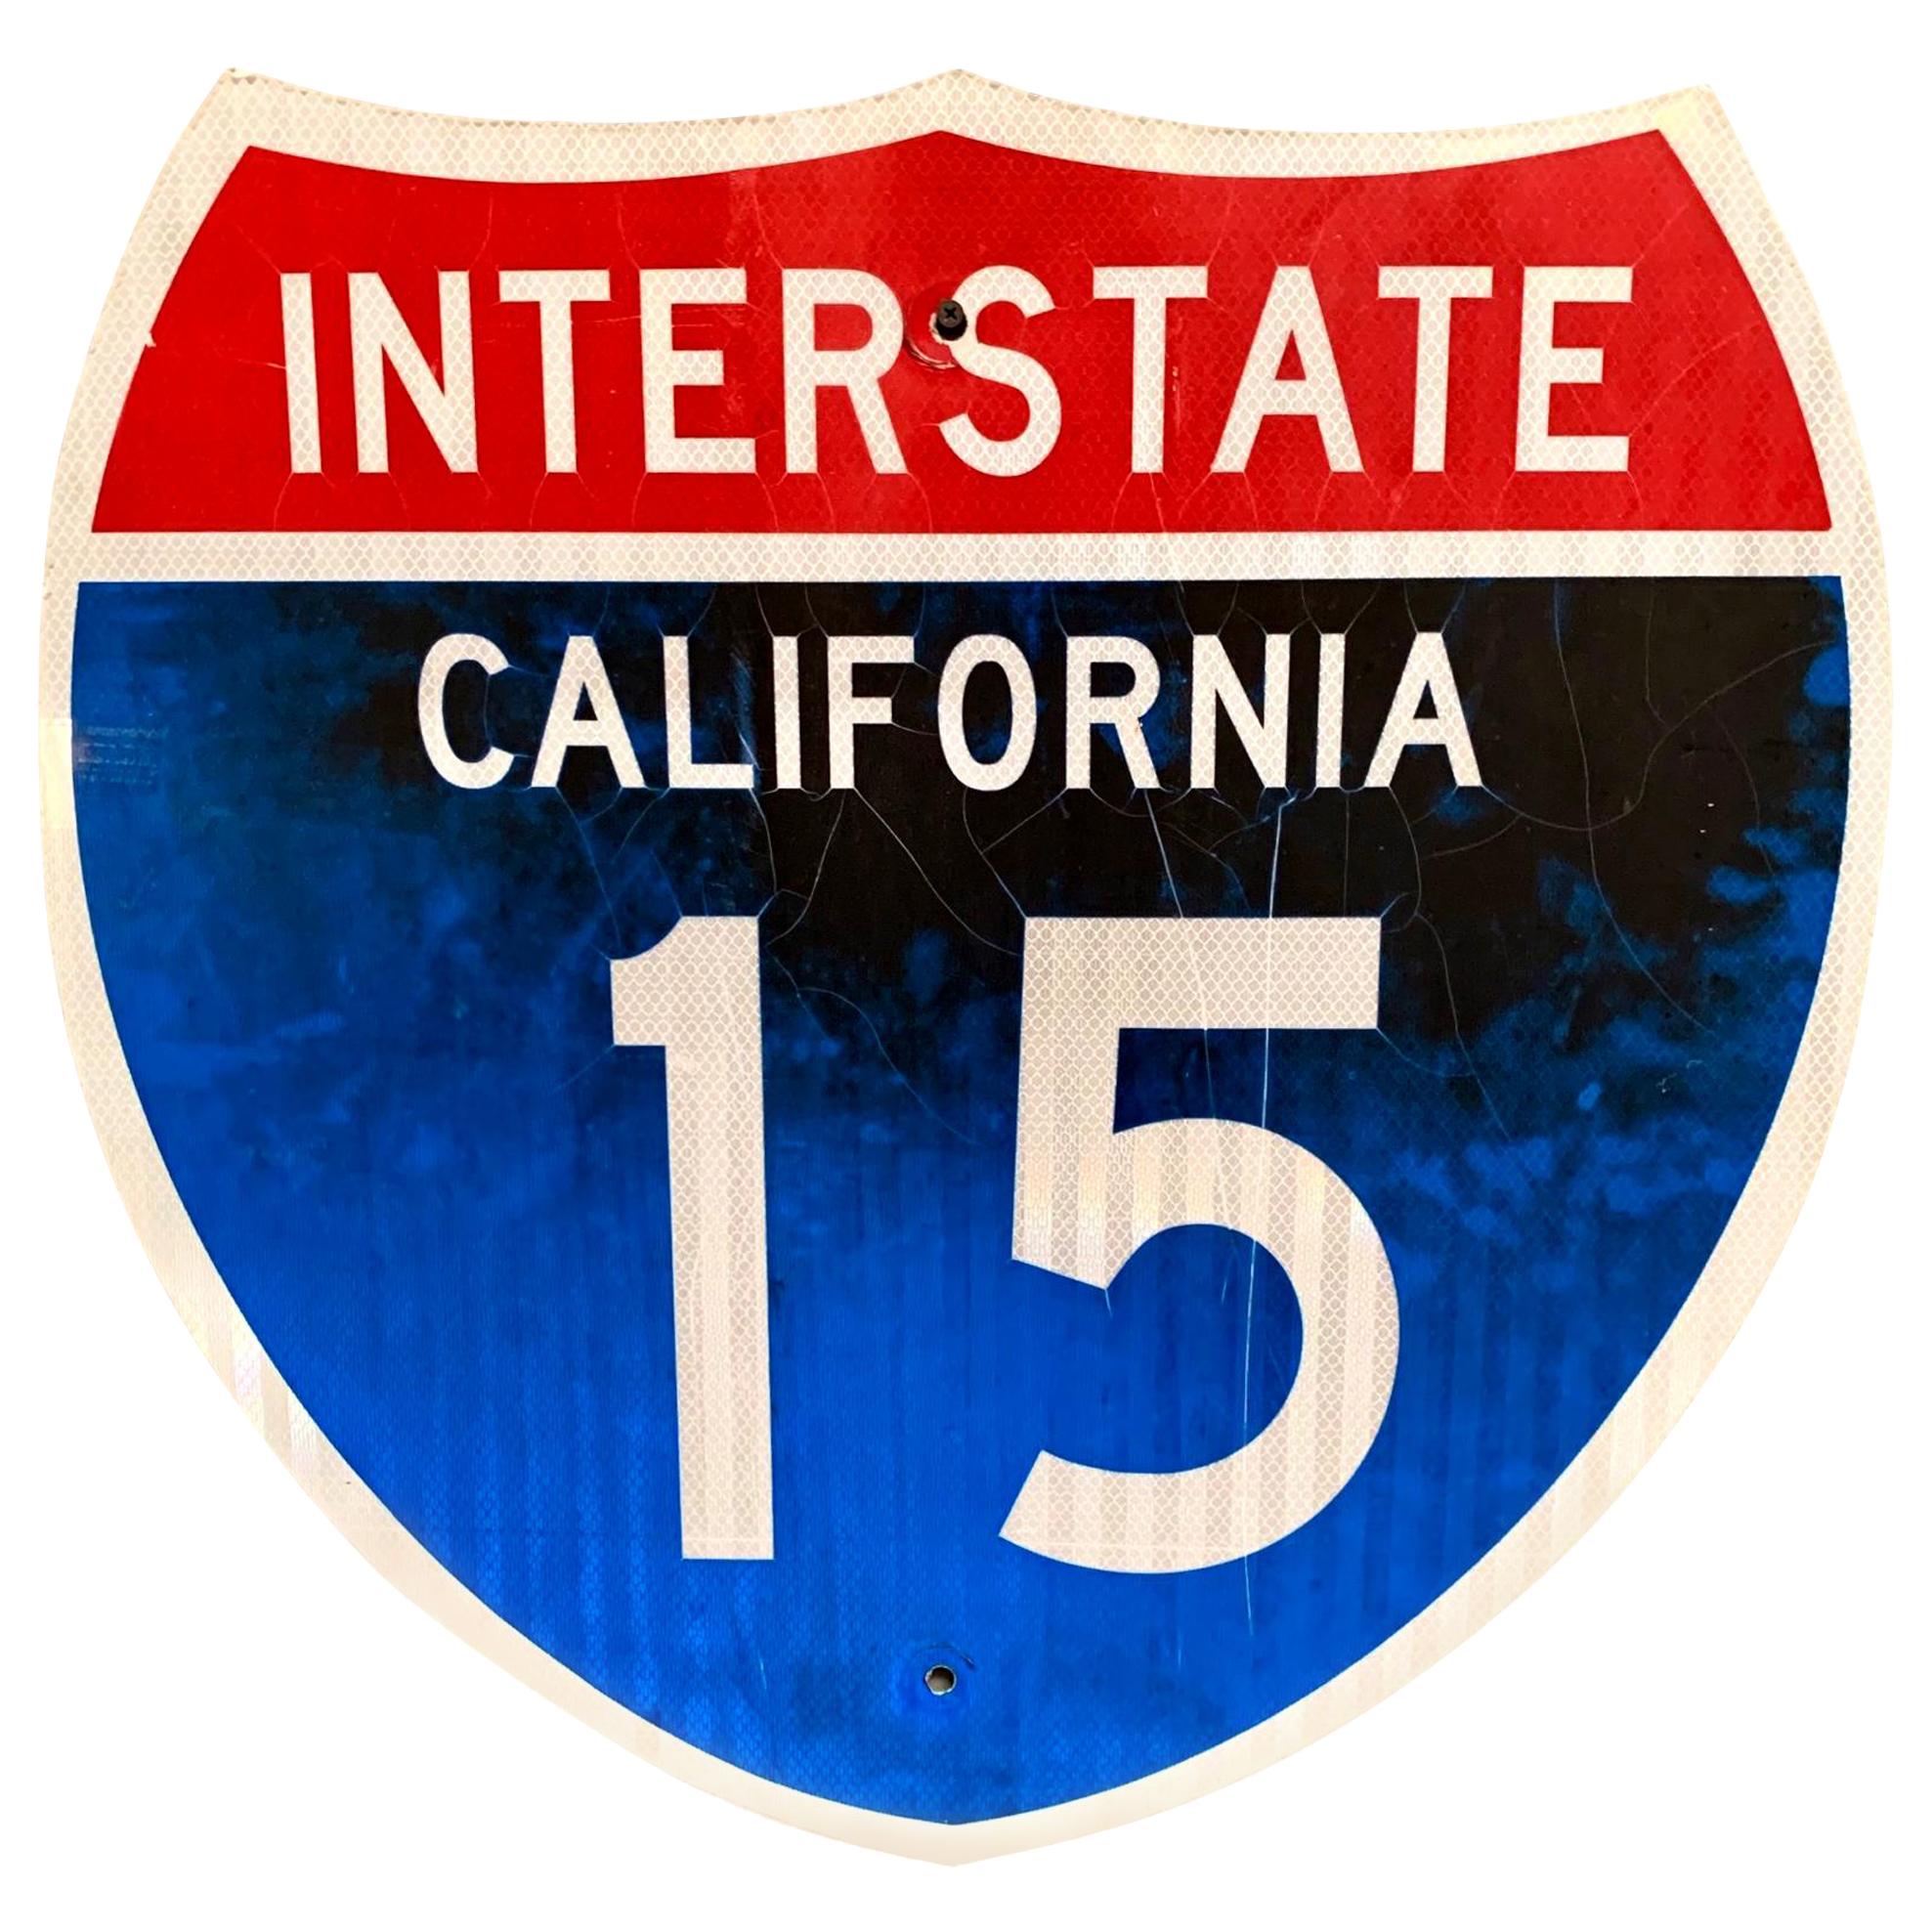 California Interstate 15 Freeway Sign For Sale